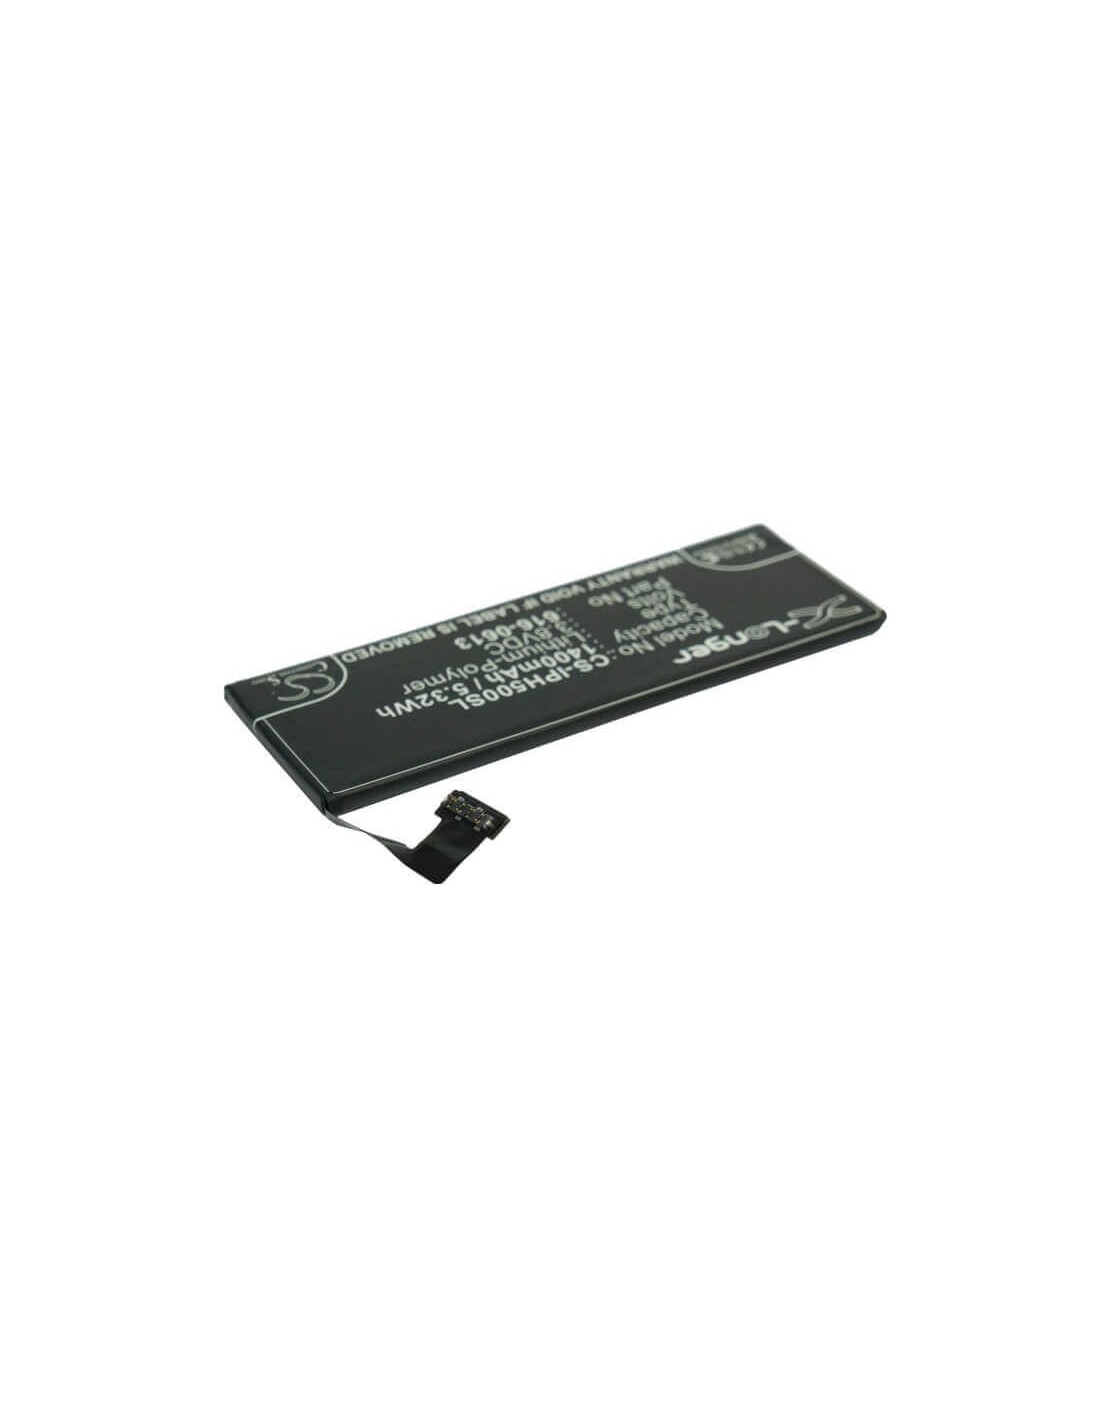 Battery for Apple iPhone 5, MD645LL/A, MD644LL/A 3.8V, 1400mAh - 5.32Wh